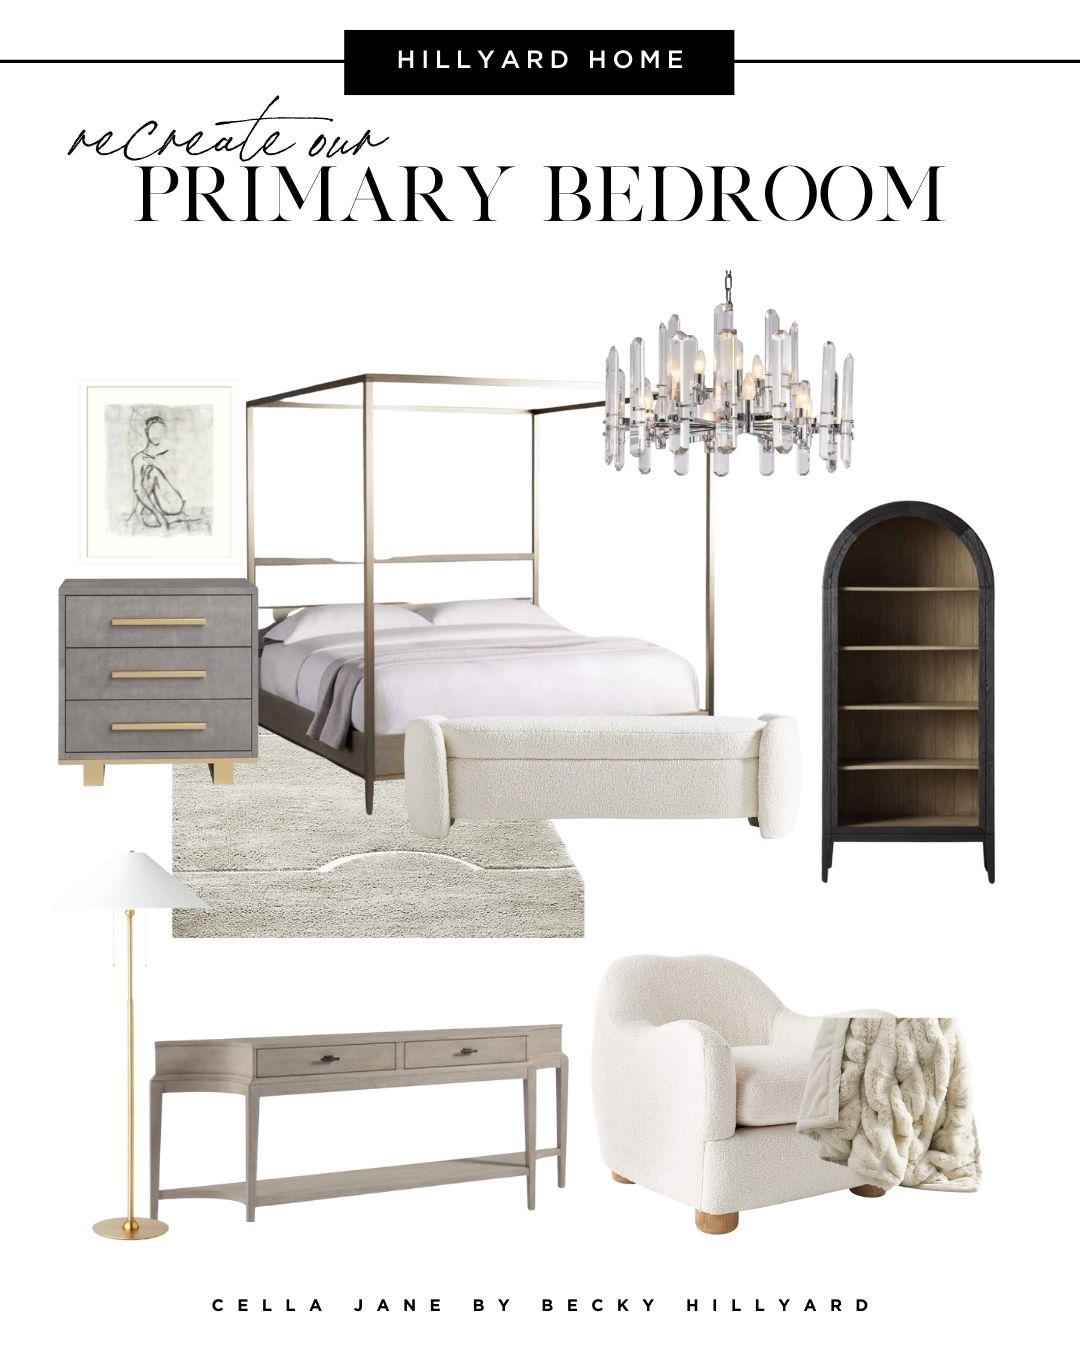 Recreate Our Primary Bedroom